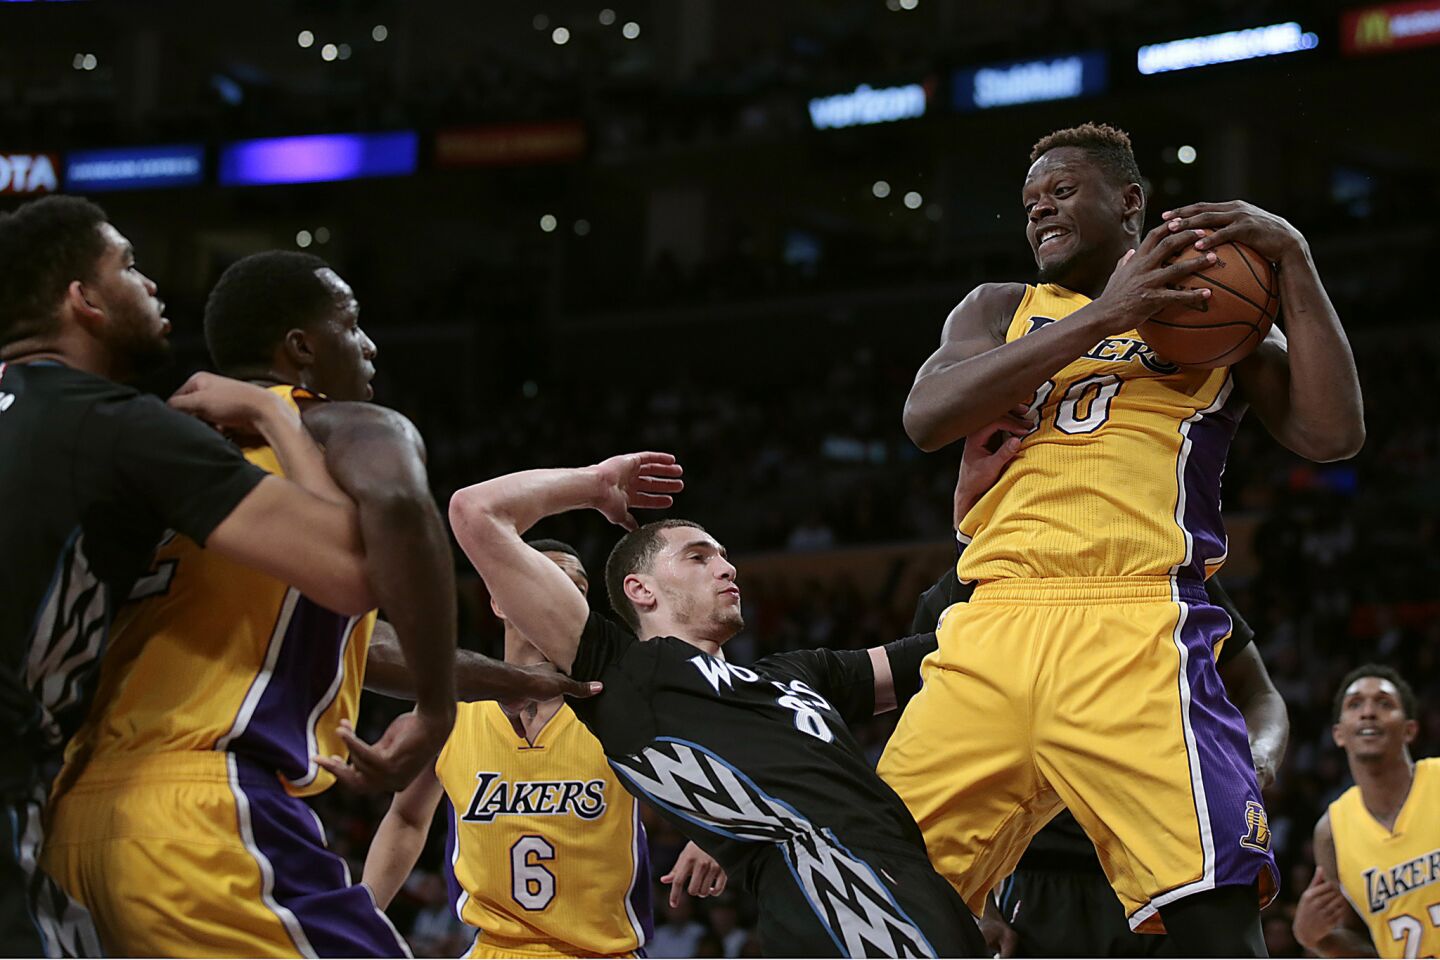 Julius Randle pulls down a rebound over Timberwolves guard Zach LaVine during the fourth quarter of the Lakers' 119-115 win over Minnesota on Feb. 2.